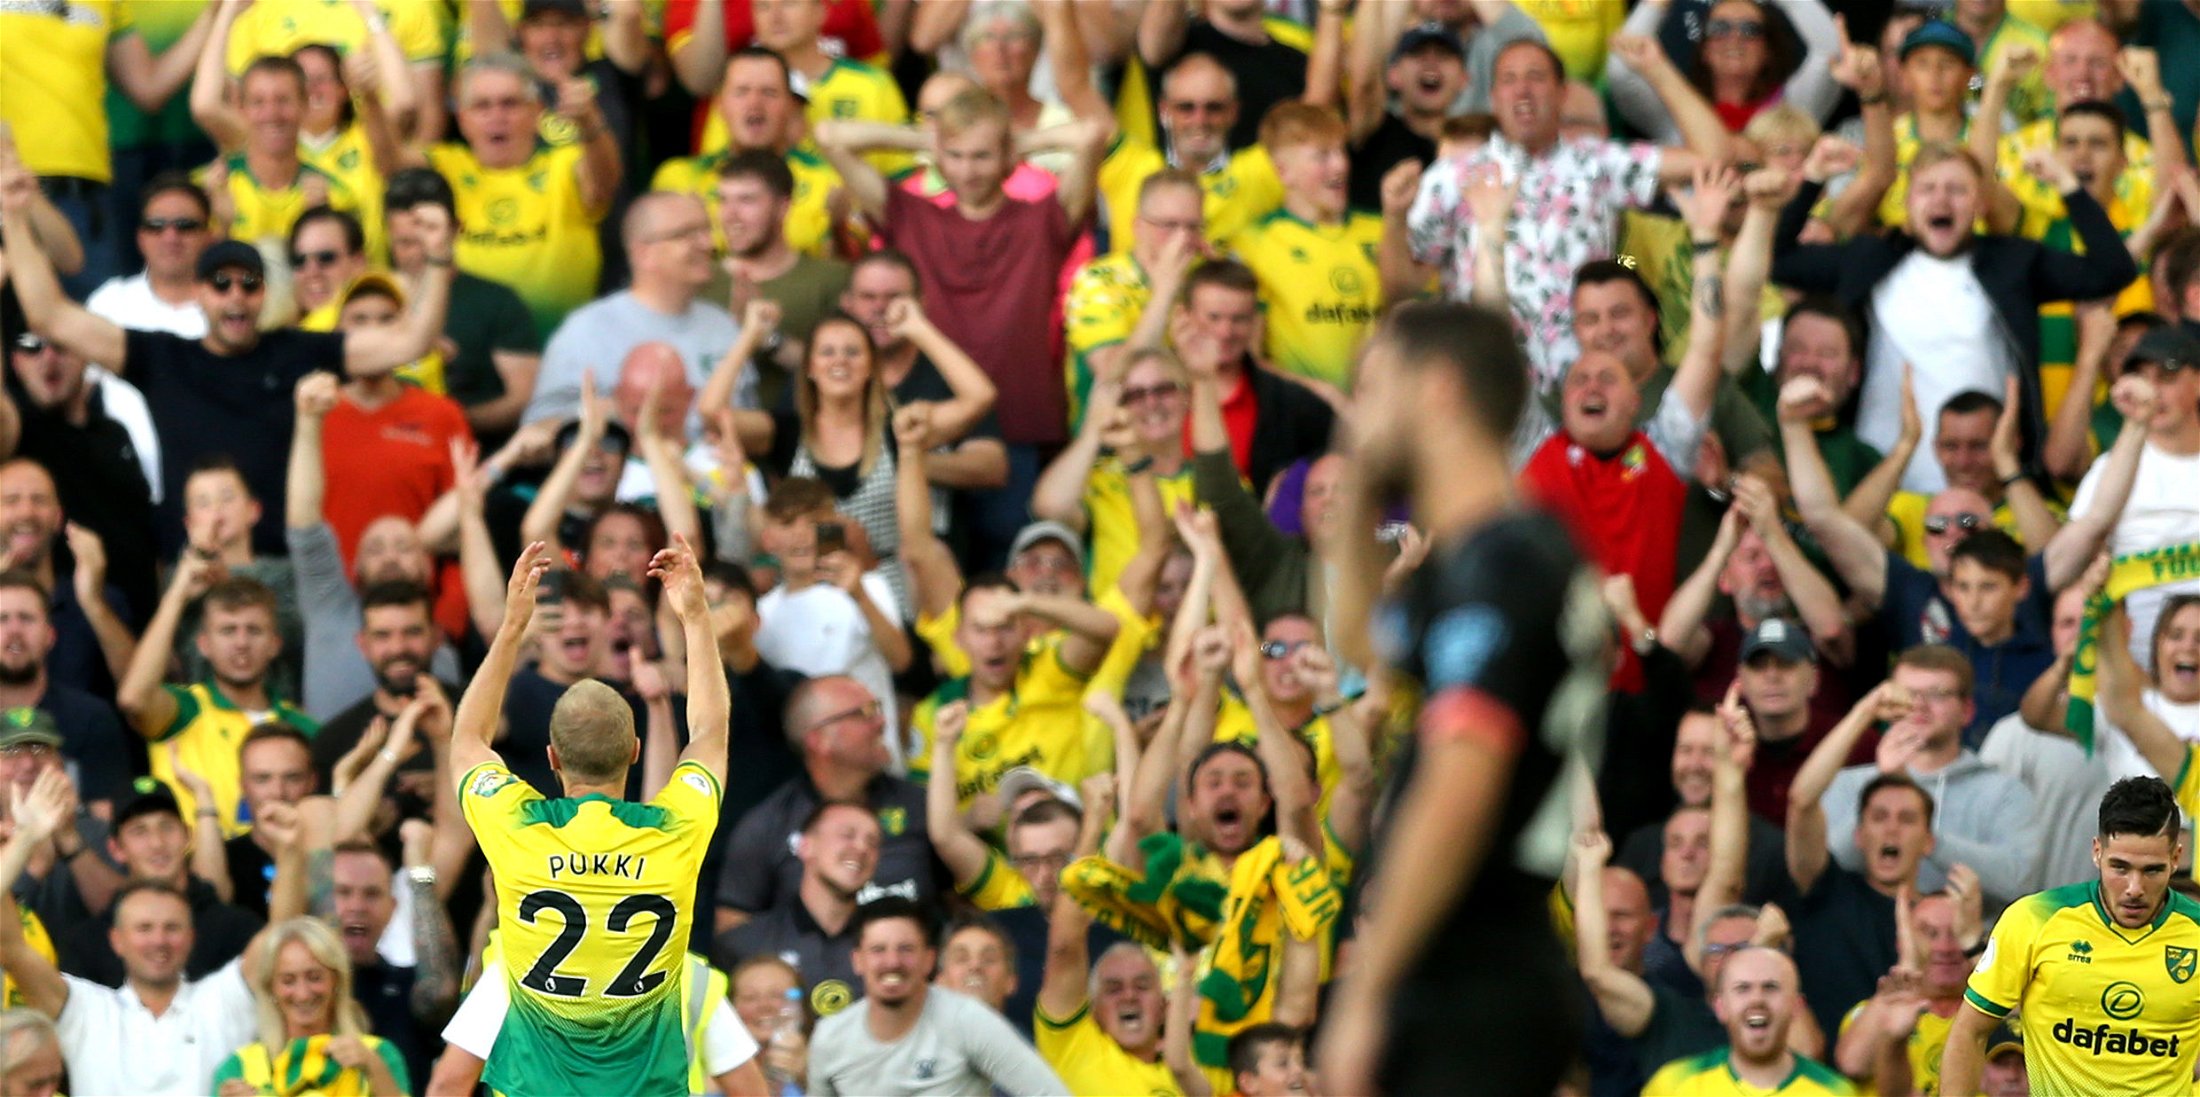 Where Manchester City went wrong against Norwich City